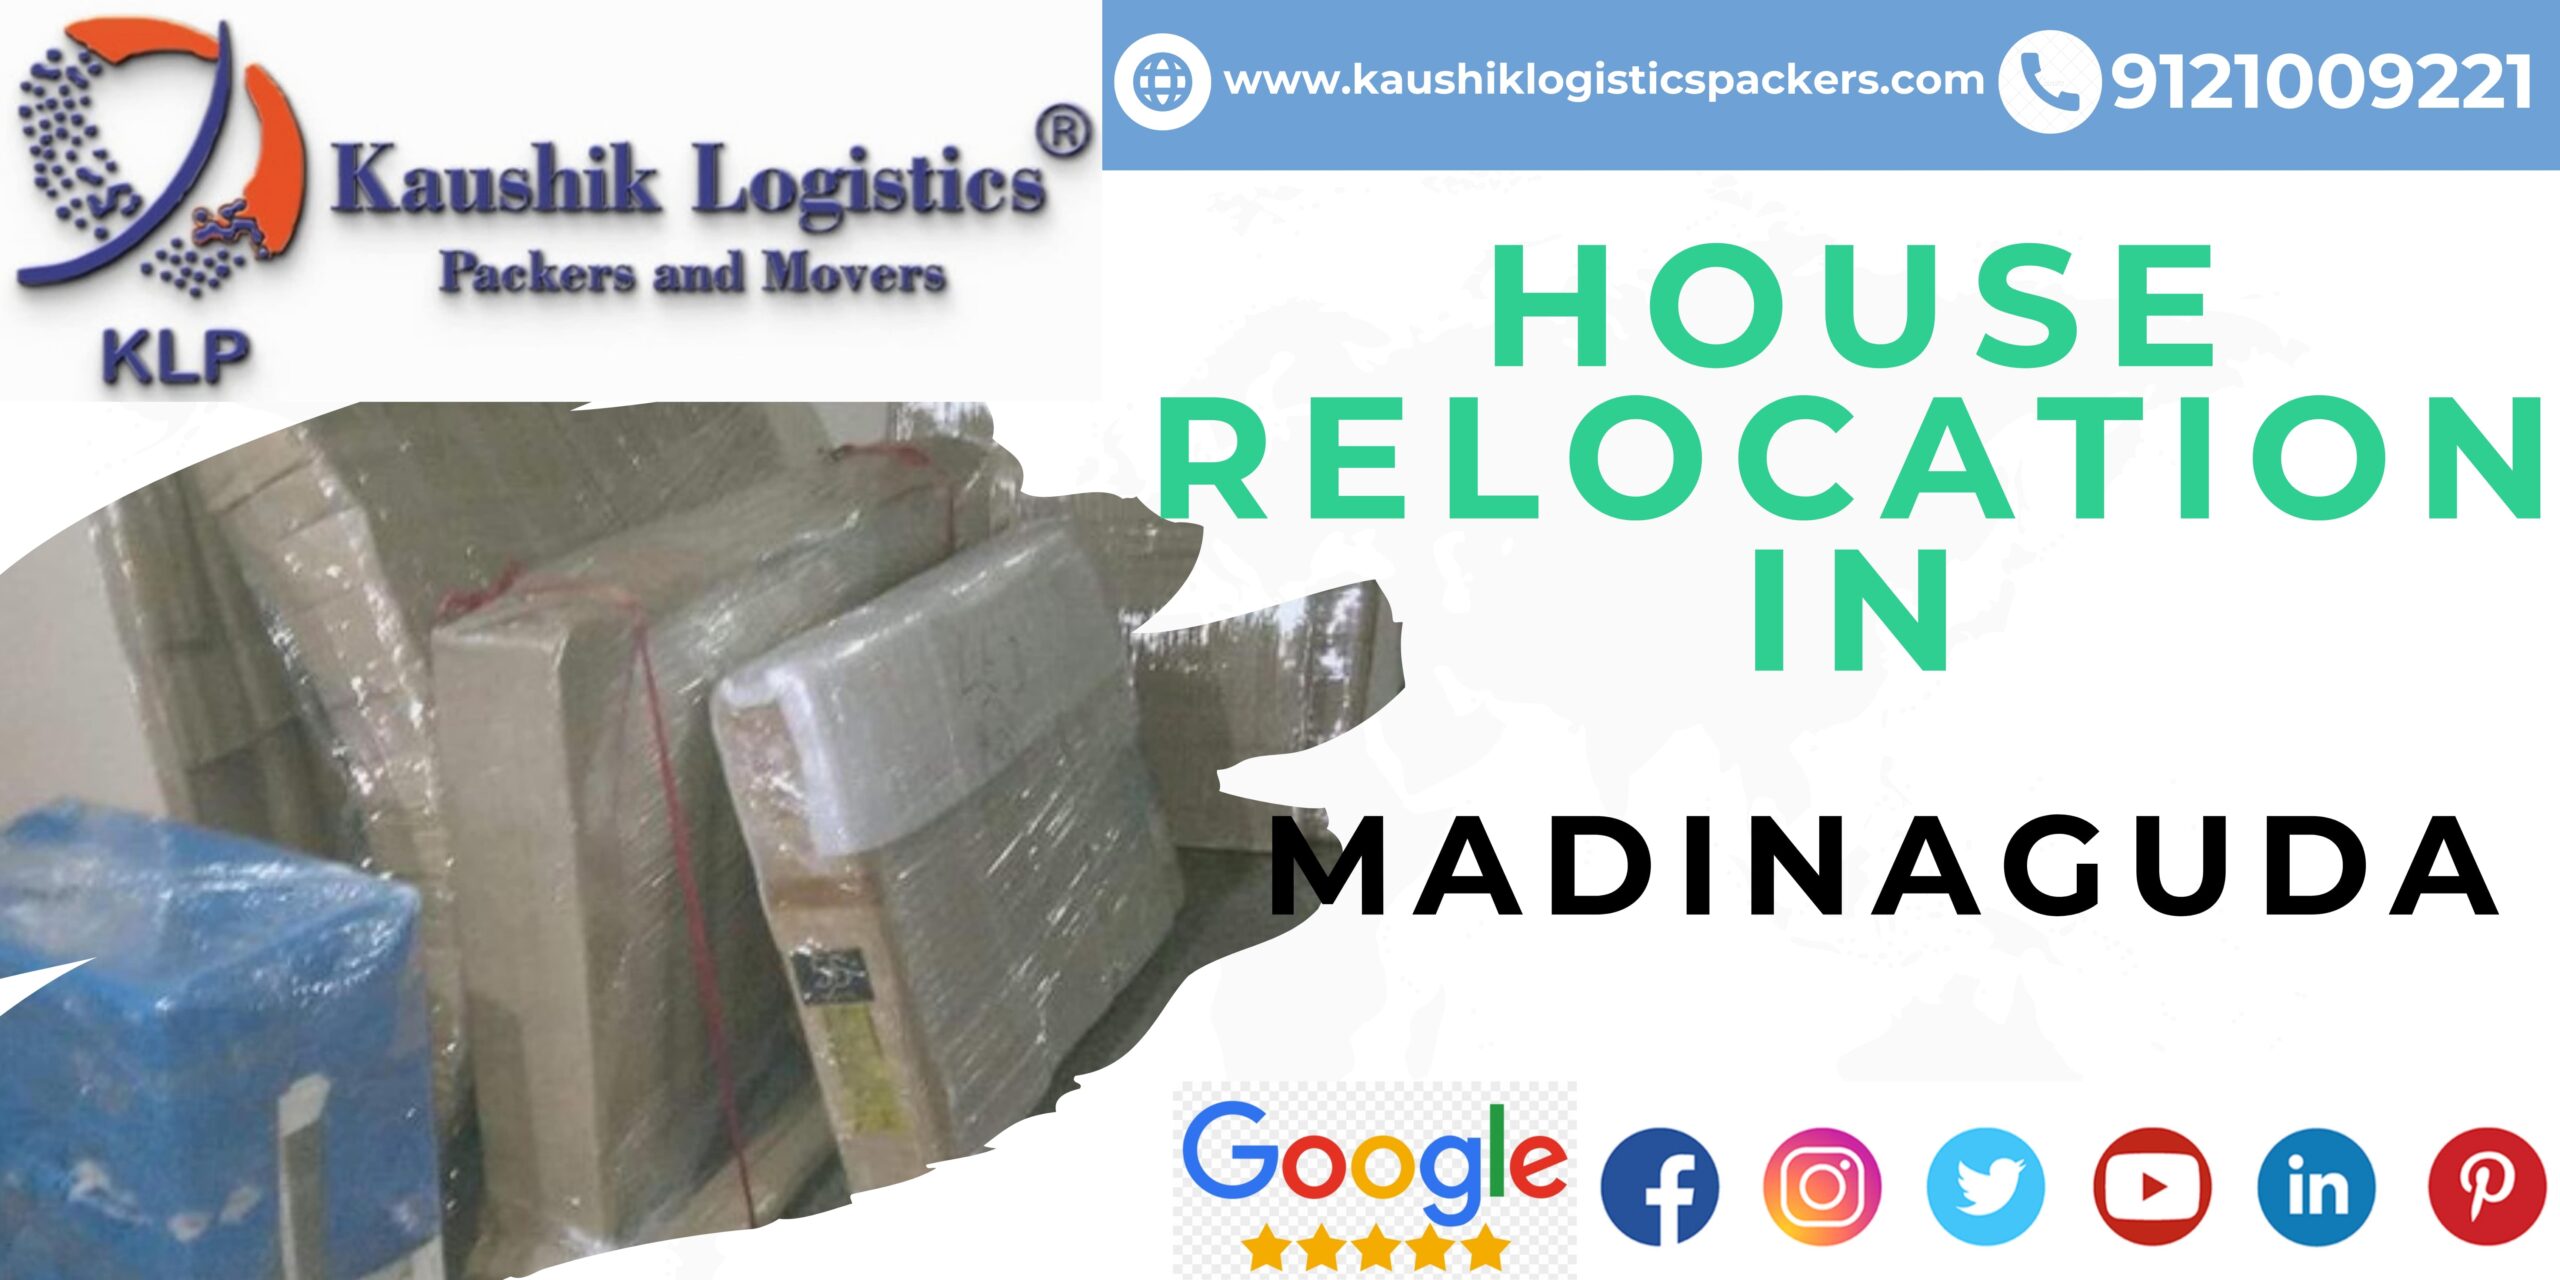 Packers and Movers In Madinaguda